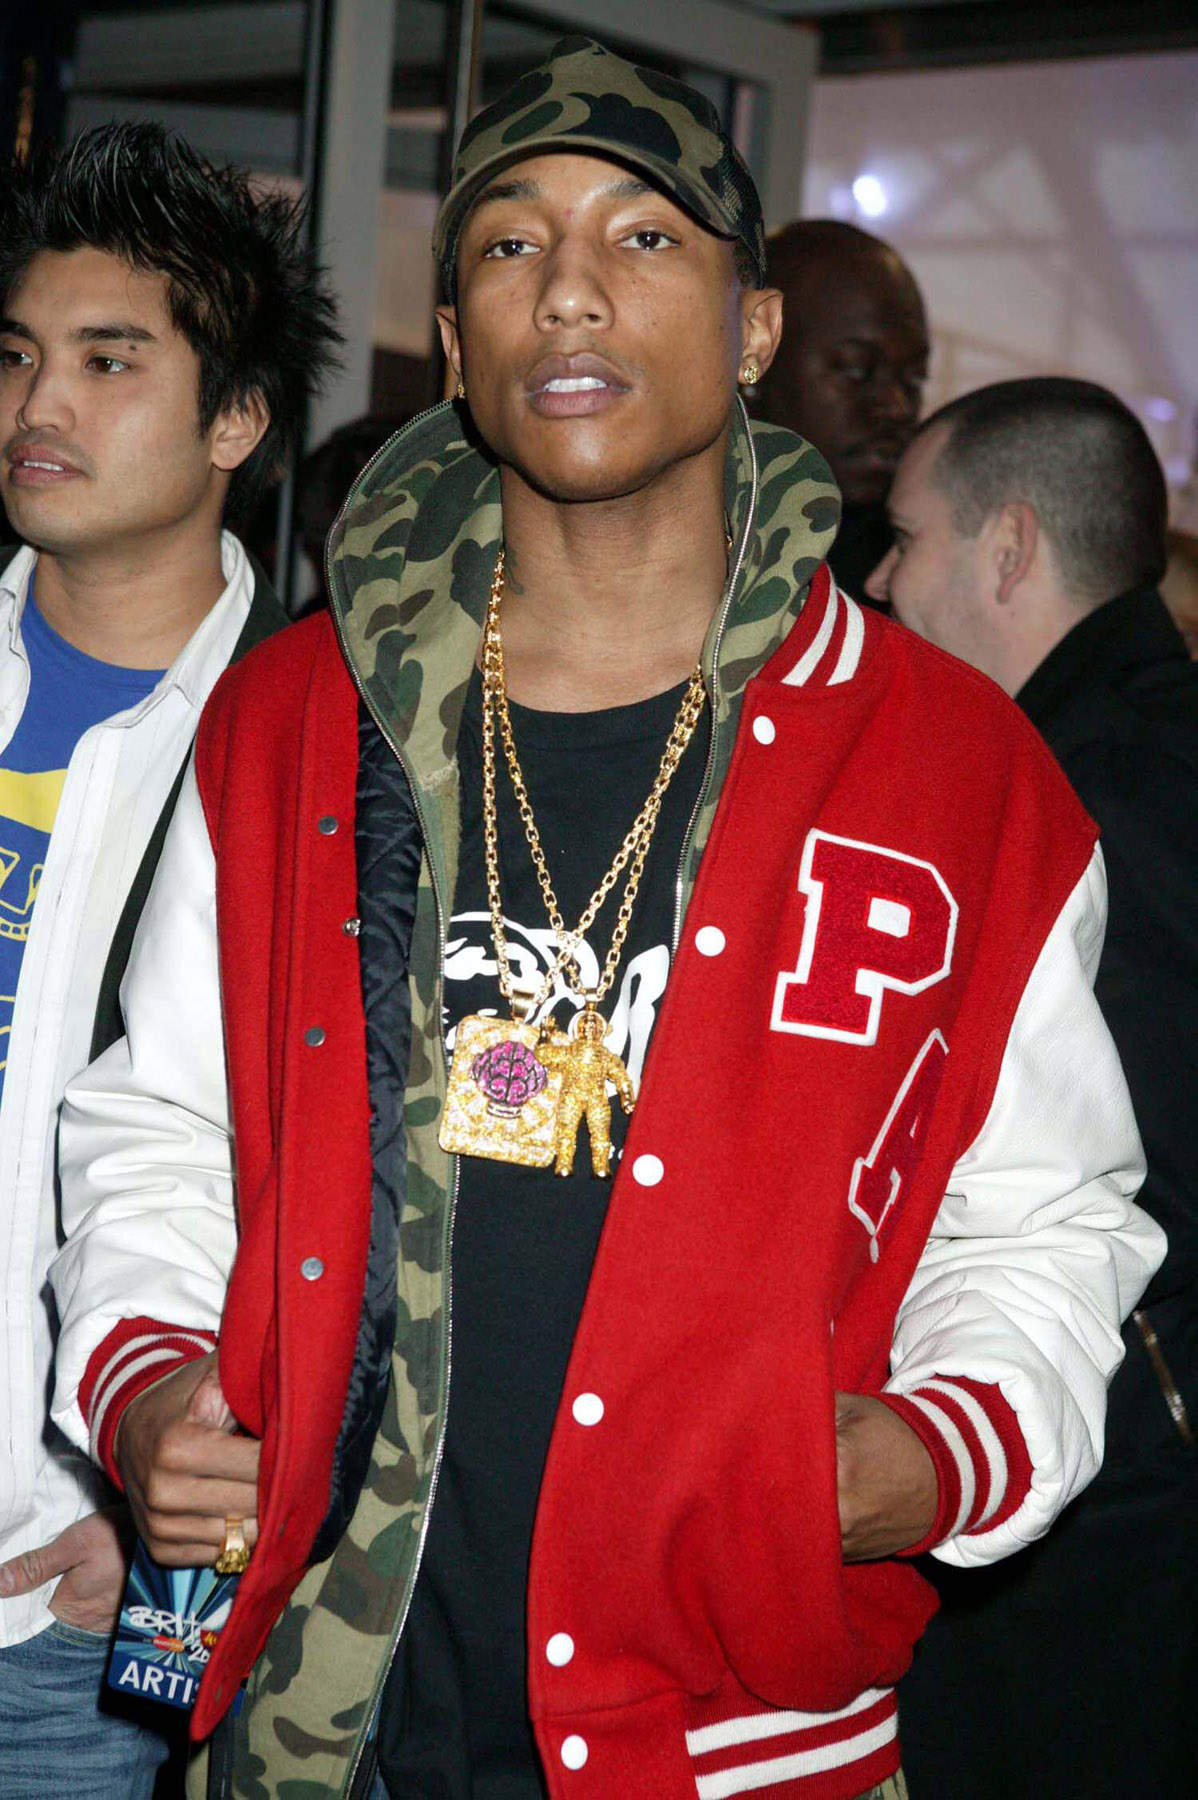 CHAINS ON SKATEBOARD P: WHY PHARRELL WILLIAMS AT LOUIS VUITTON IS